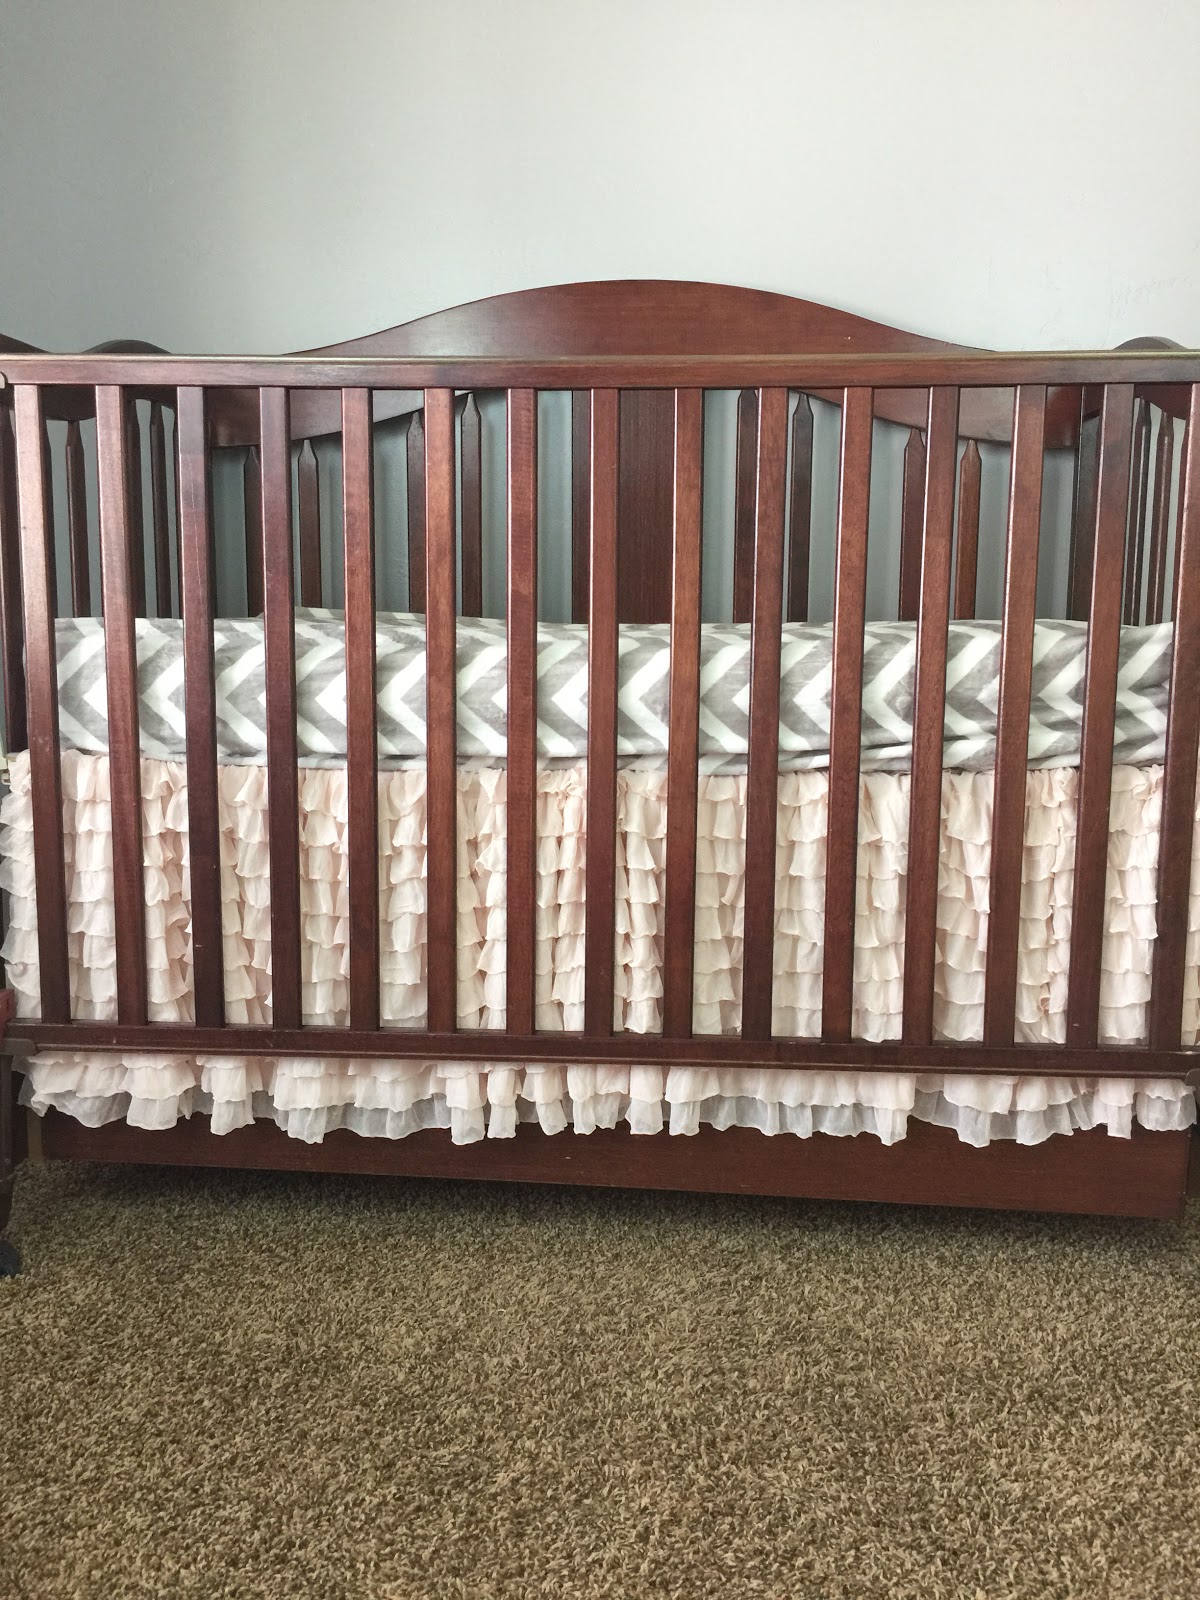 How to Sew a Ruffle Crib Skirt Using Ruffle Fabric (Includes Bed Sizes too-Twin, Queen, King)